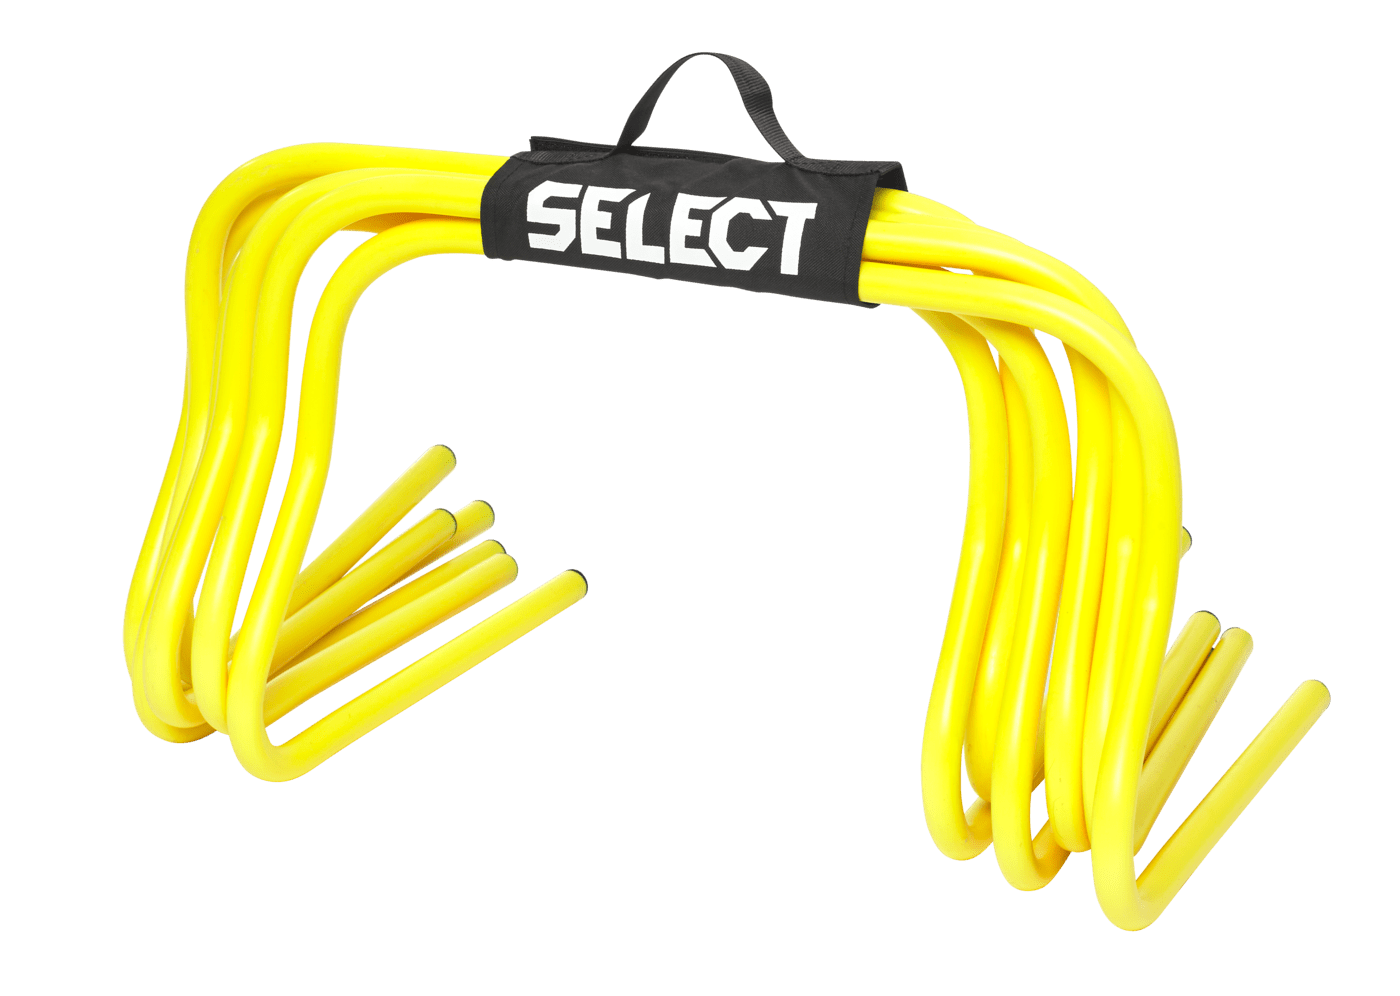 800011_yellow_Training_hurdle_50x30-cm_with_SELECT_handle_v22